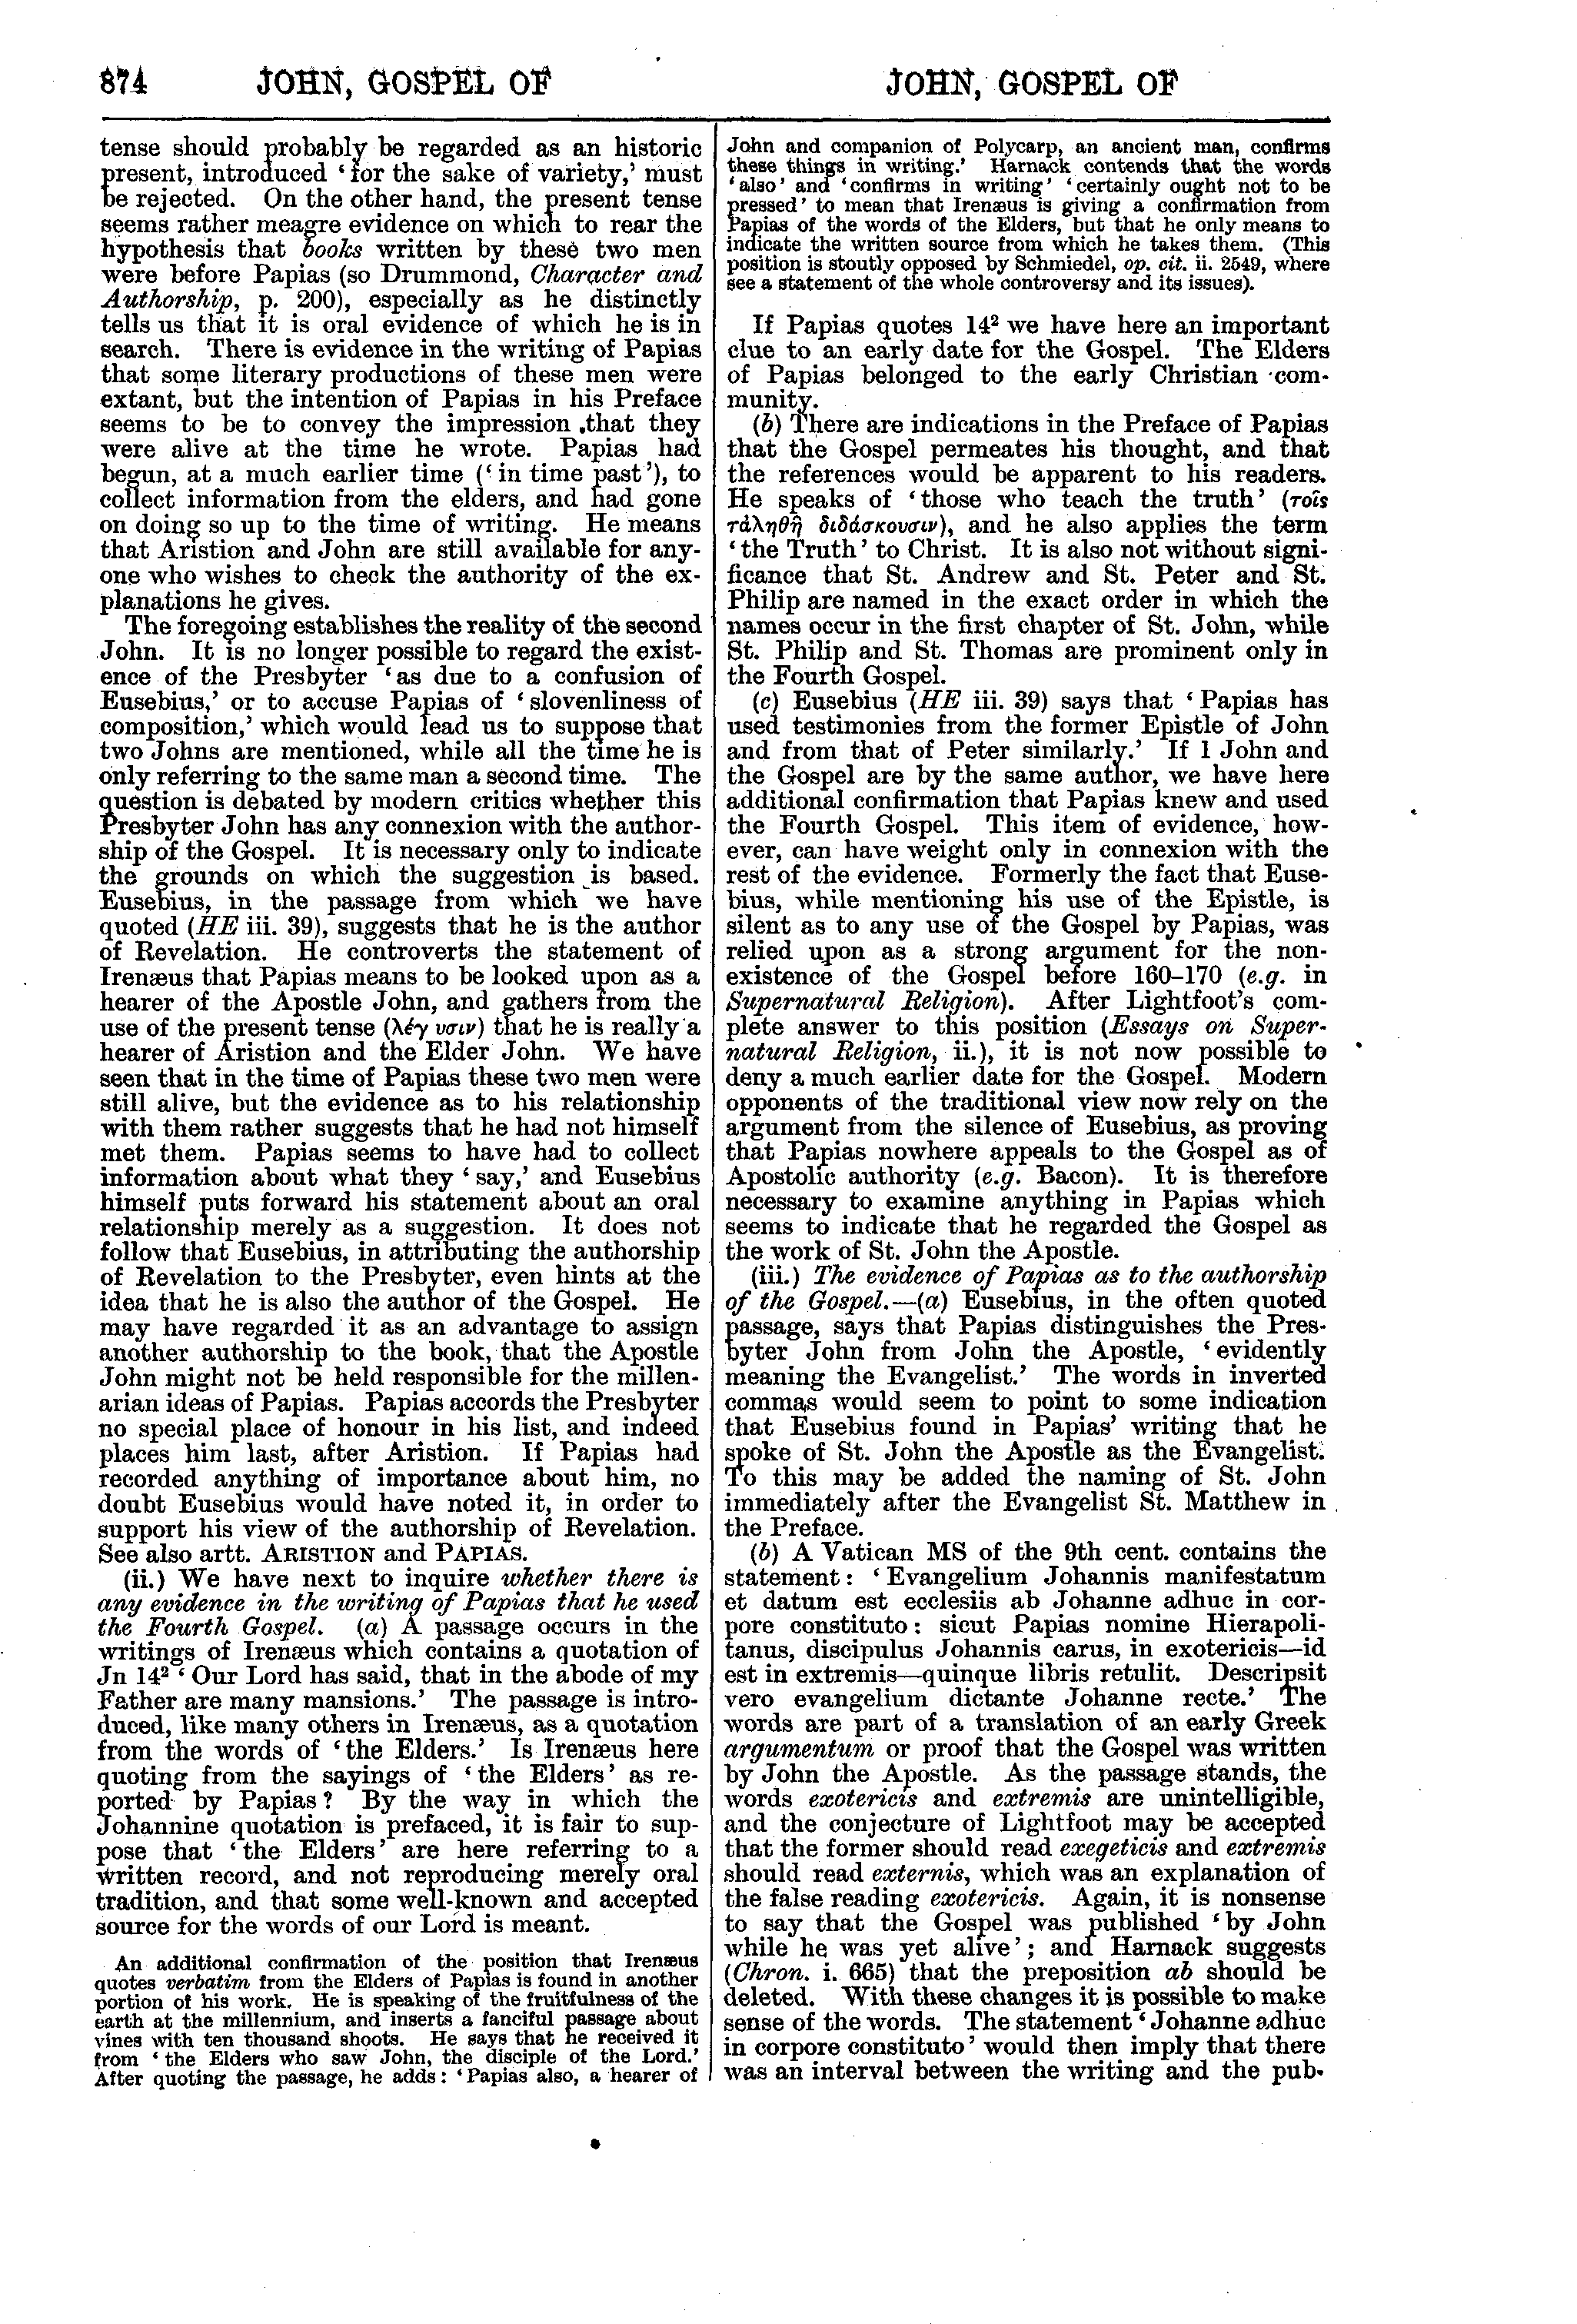 Image of page 874